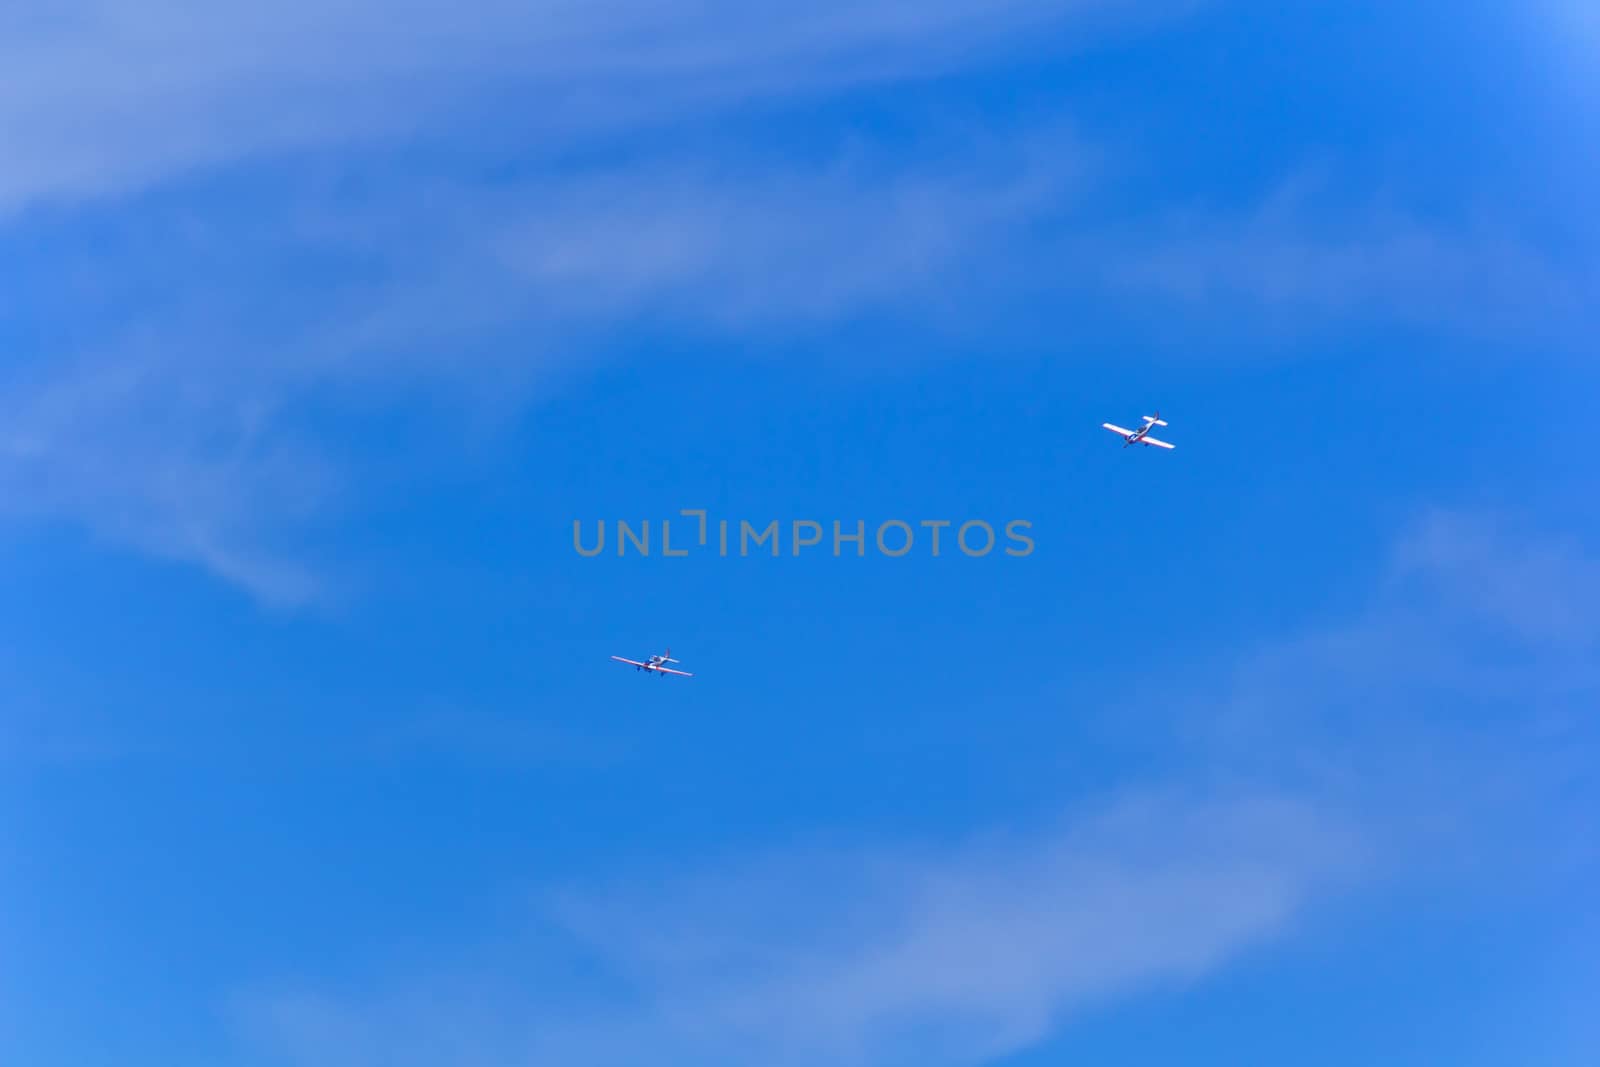 Photo of two flying military airplanes in blue sky